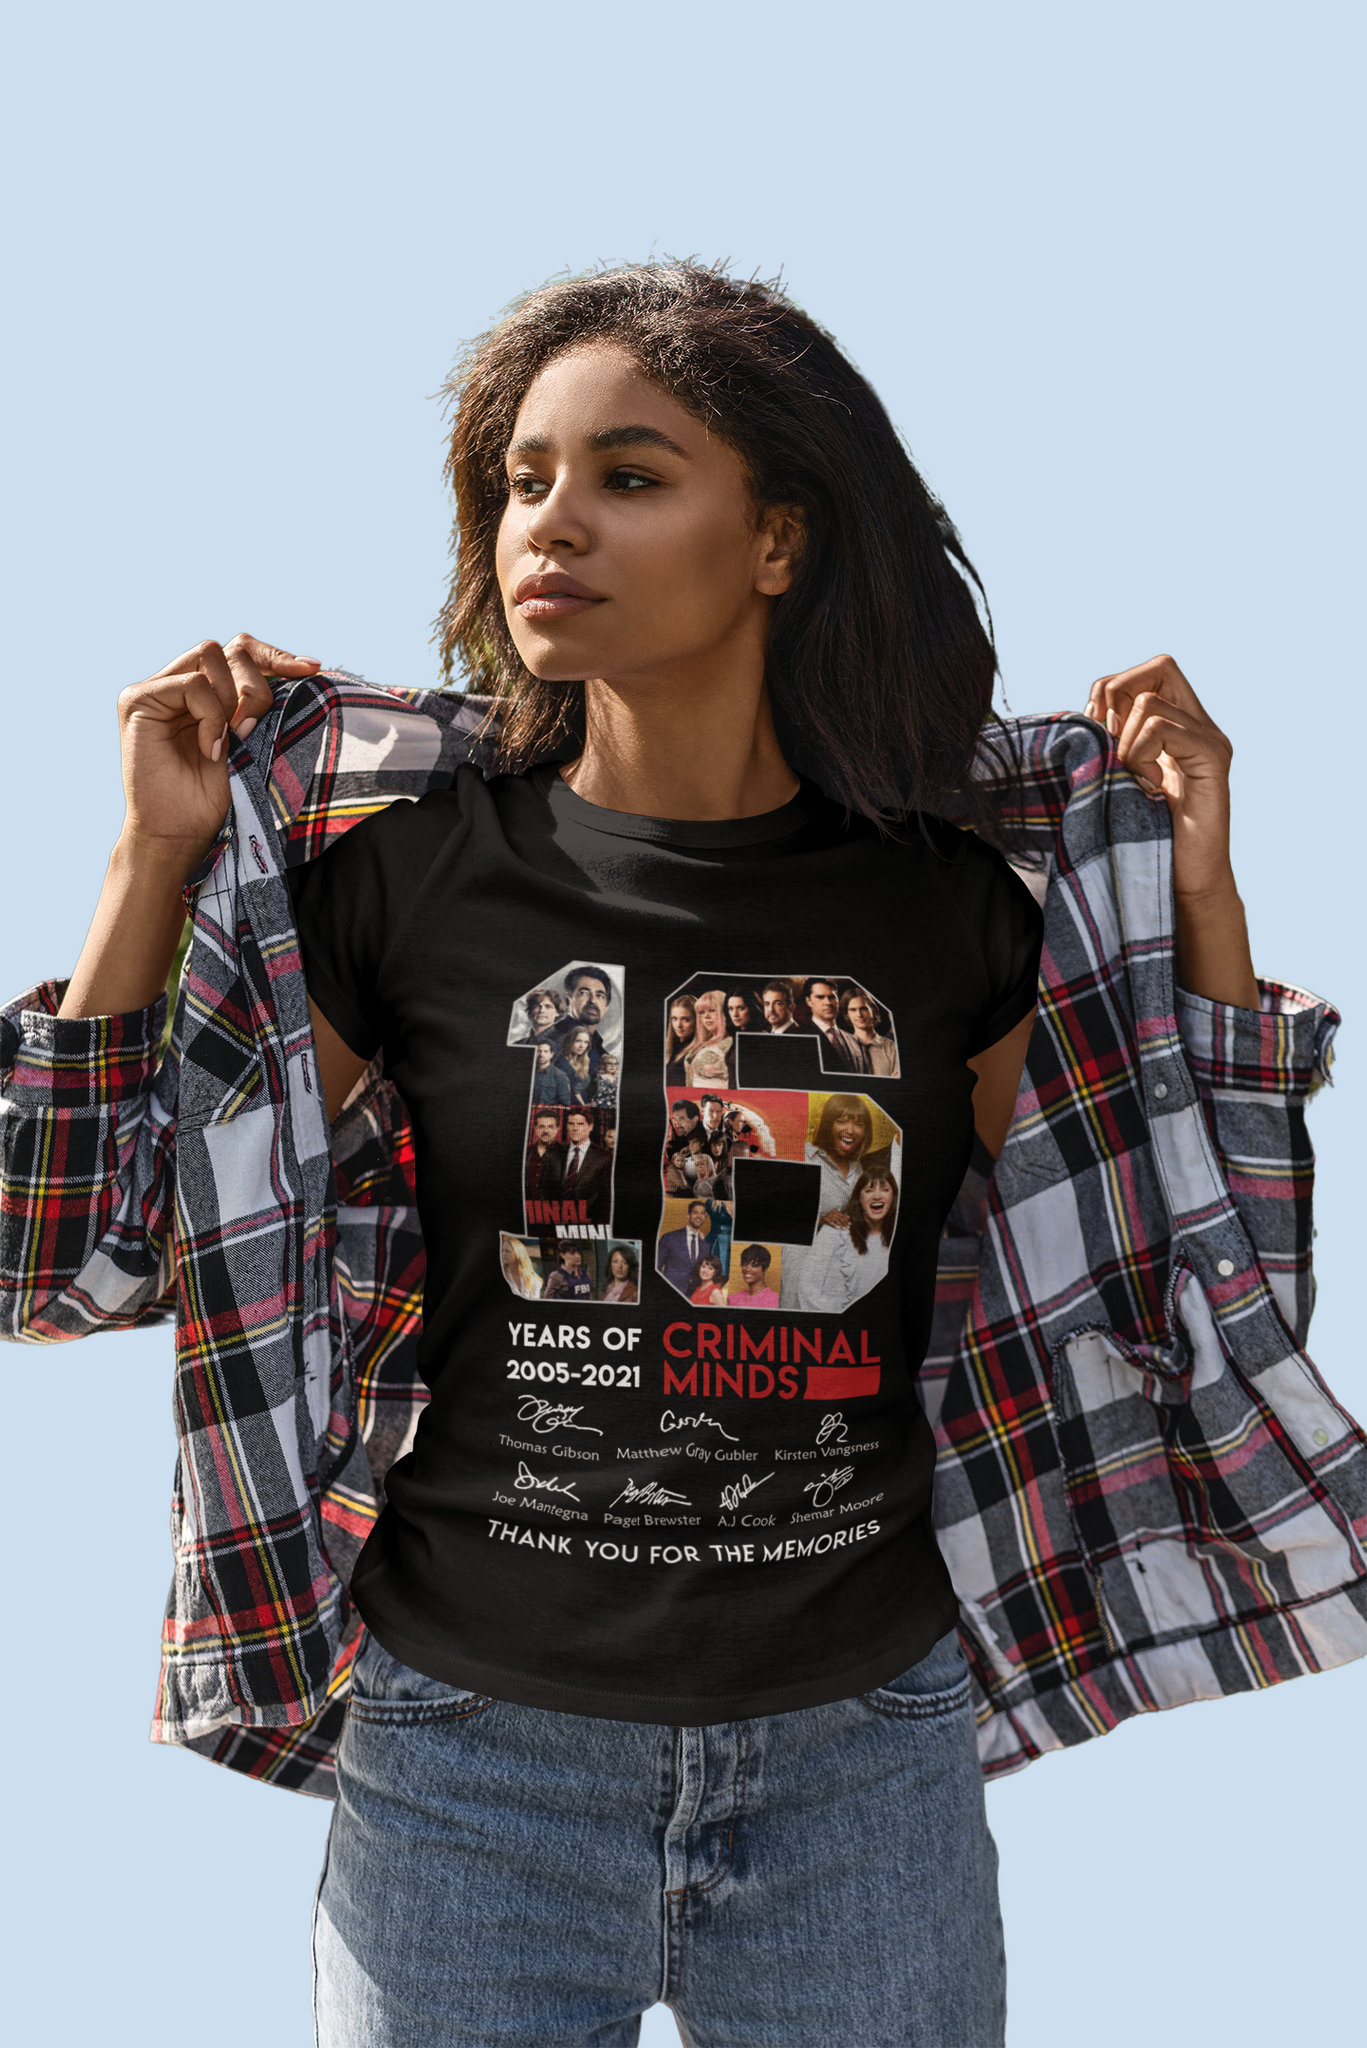 Criminal Minds T Shirt, Criminal Minds Characters Signature Shirt, Thank You For The Memories Year Of 2005 To 2021 T Shirt